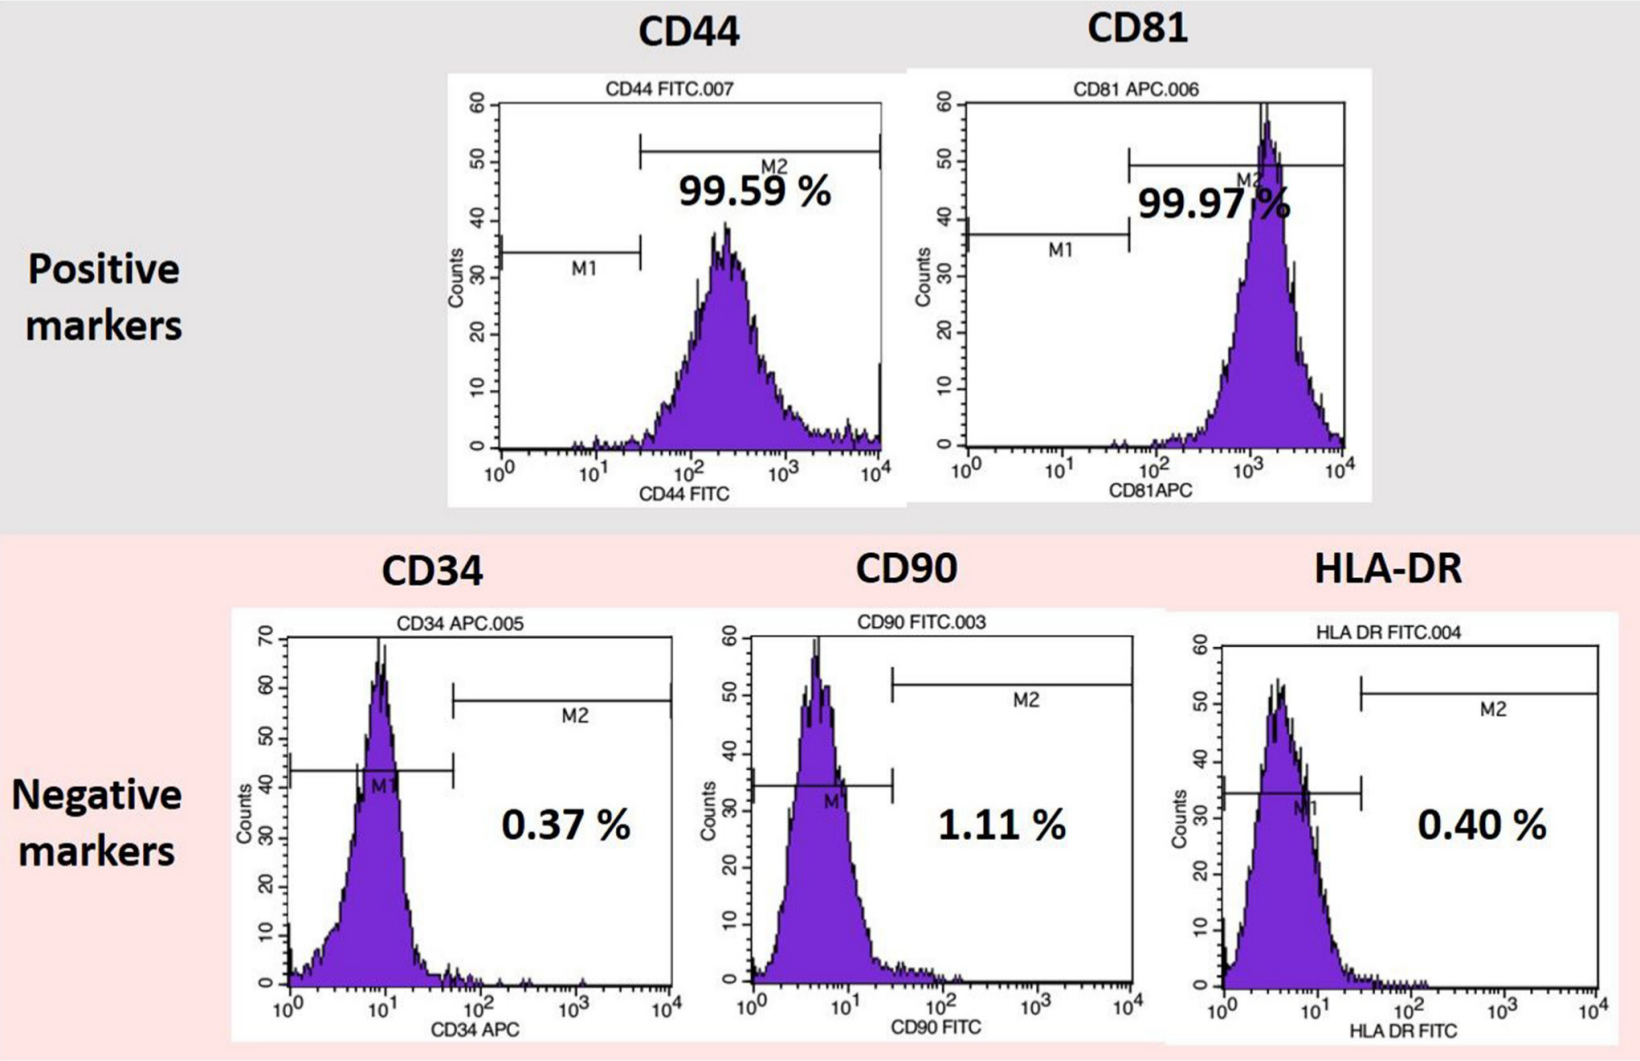 Fig. 1 
            Flow cytometry analysis showing the expression of mesenchymal stem cell (MSC) surface markers in rabbit bone marrow MSCs (BM-MSCs) (n = 3). The BM-MSC stained > 99% positive for CD44 and CD81 MSC surface markers and negative for CD34, CD90, and human leukocyte antigen - DR isotype (HLA-DR). APC, allophycocyanin; FITC, fuorescein isothiocyanate.
          